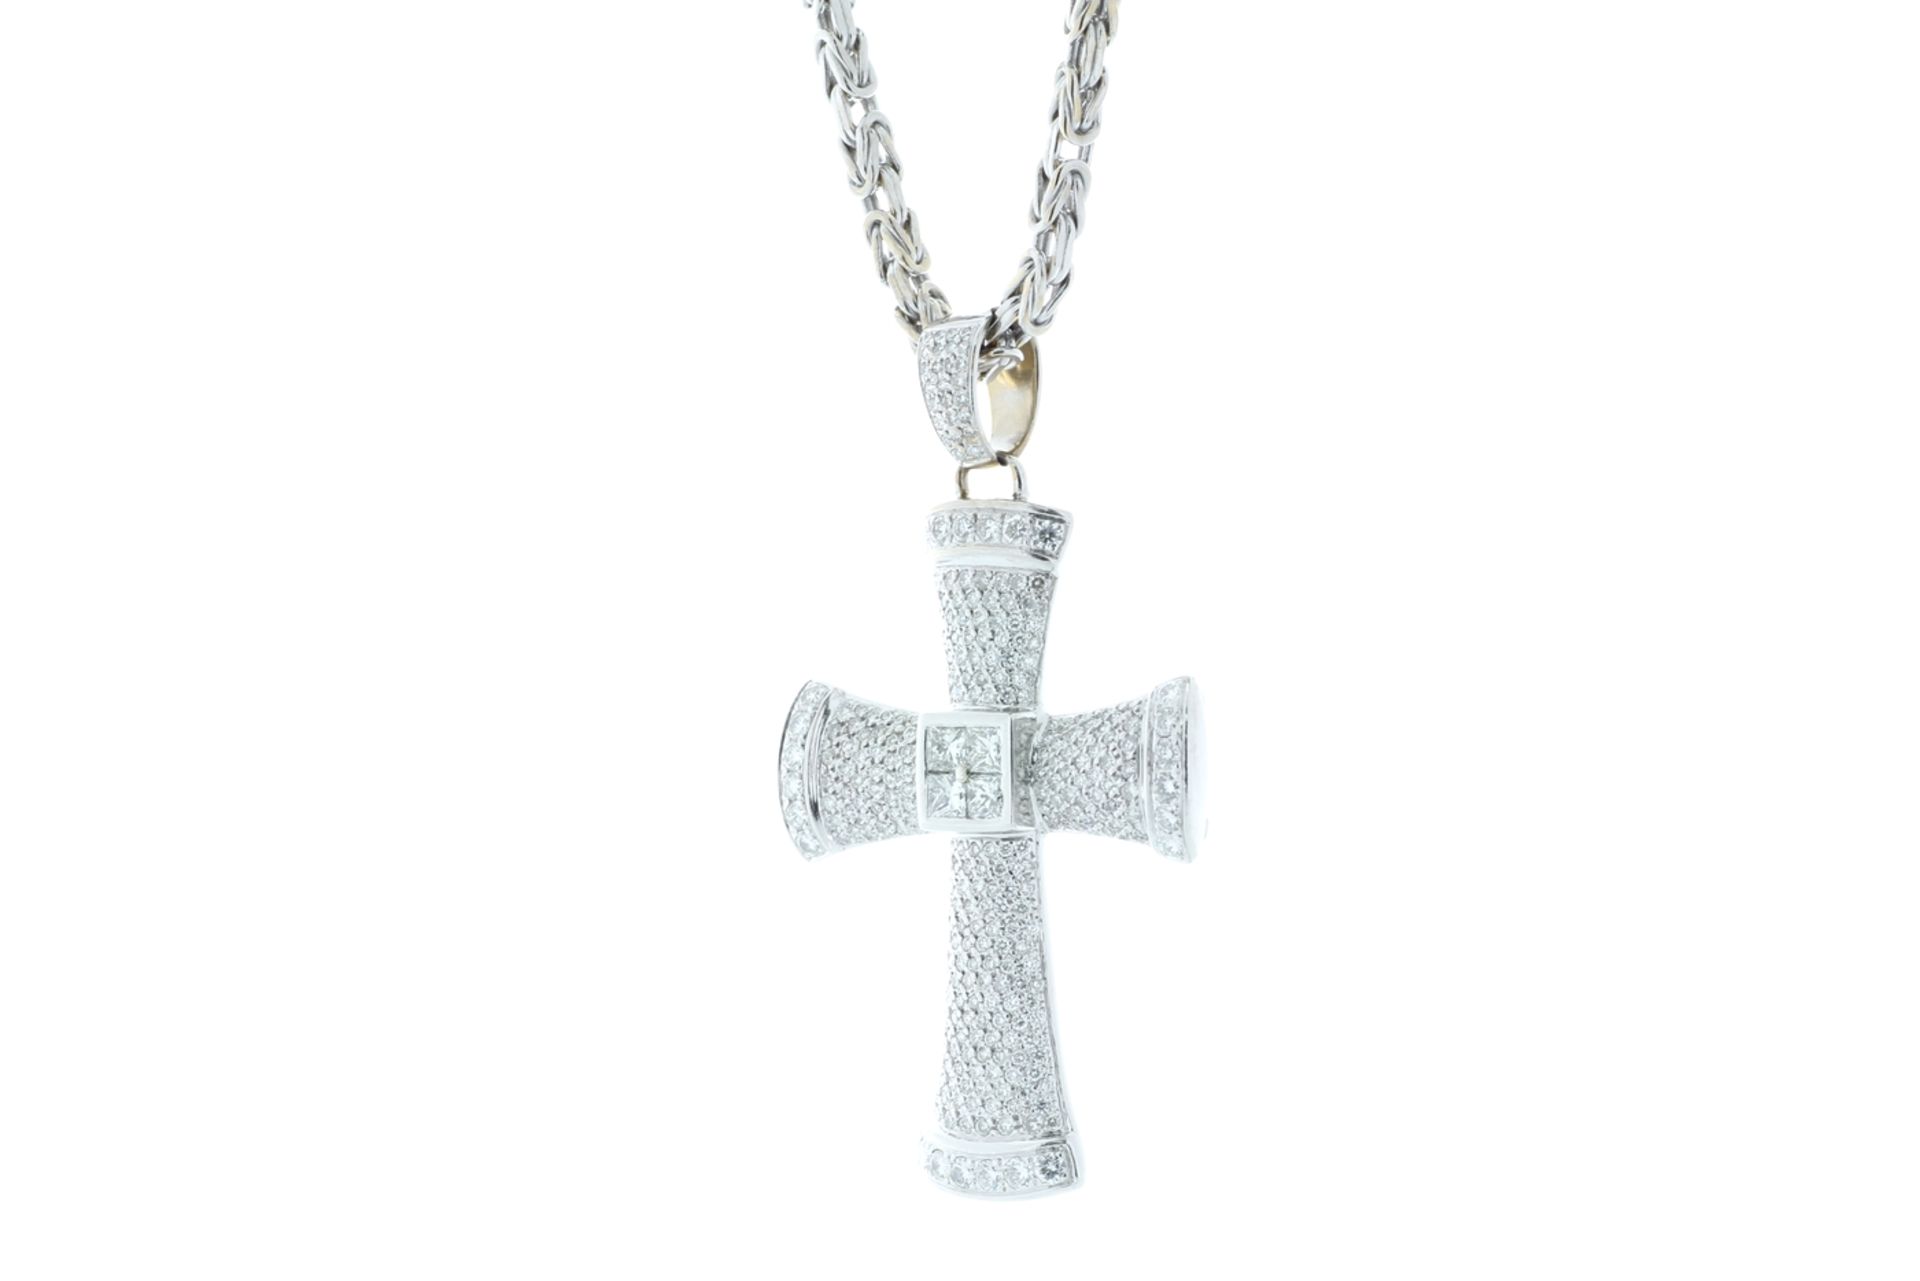 18ct White Gold Diamond Cross Pendant and Chain 5.12 Carats - Valued By AGI £78,880.00 - A beautiful - Image 2 of 5